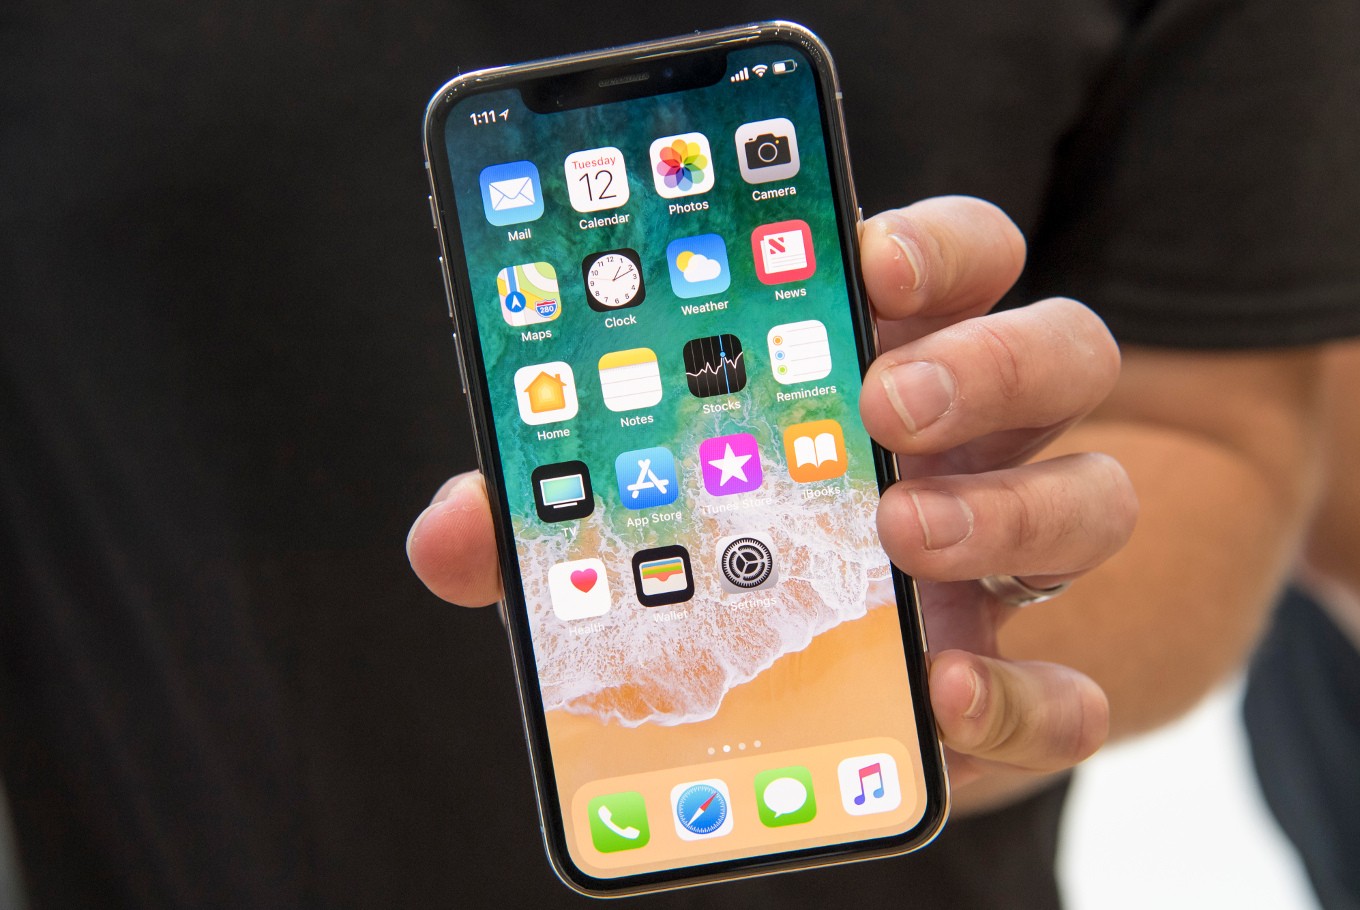 Iphone X May Earn Samsung More Money Than Galaxy S8 Report Science Tech The Jakarta Post